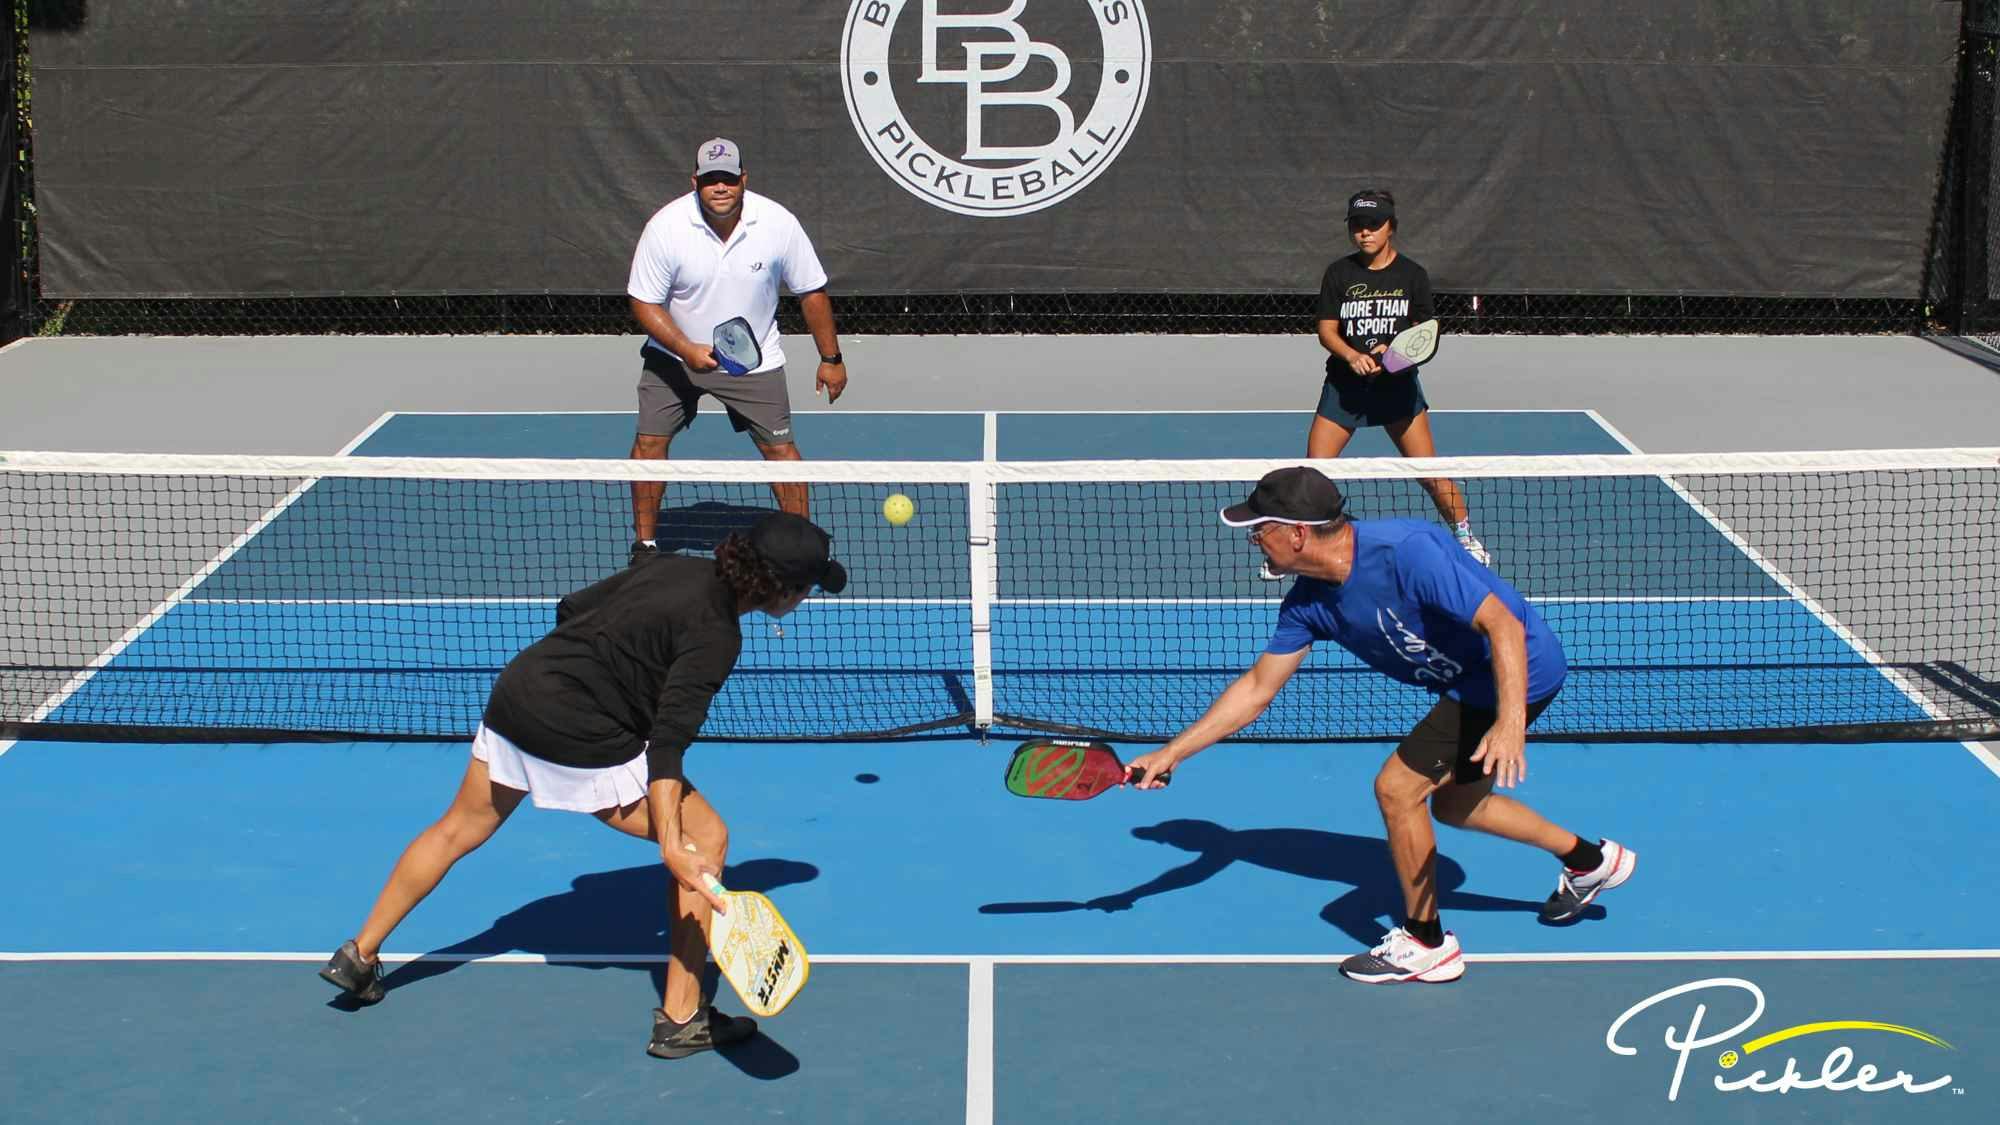 I SPED UP THE PICKLEBALL...NOW WHAT? 5 TIPS TO WIN POINTS AFTER THE SPEED UP